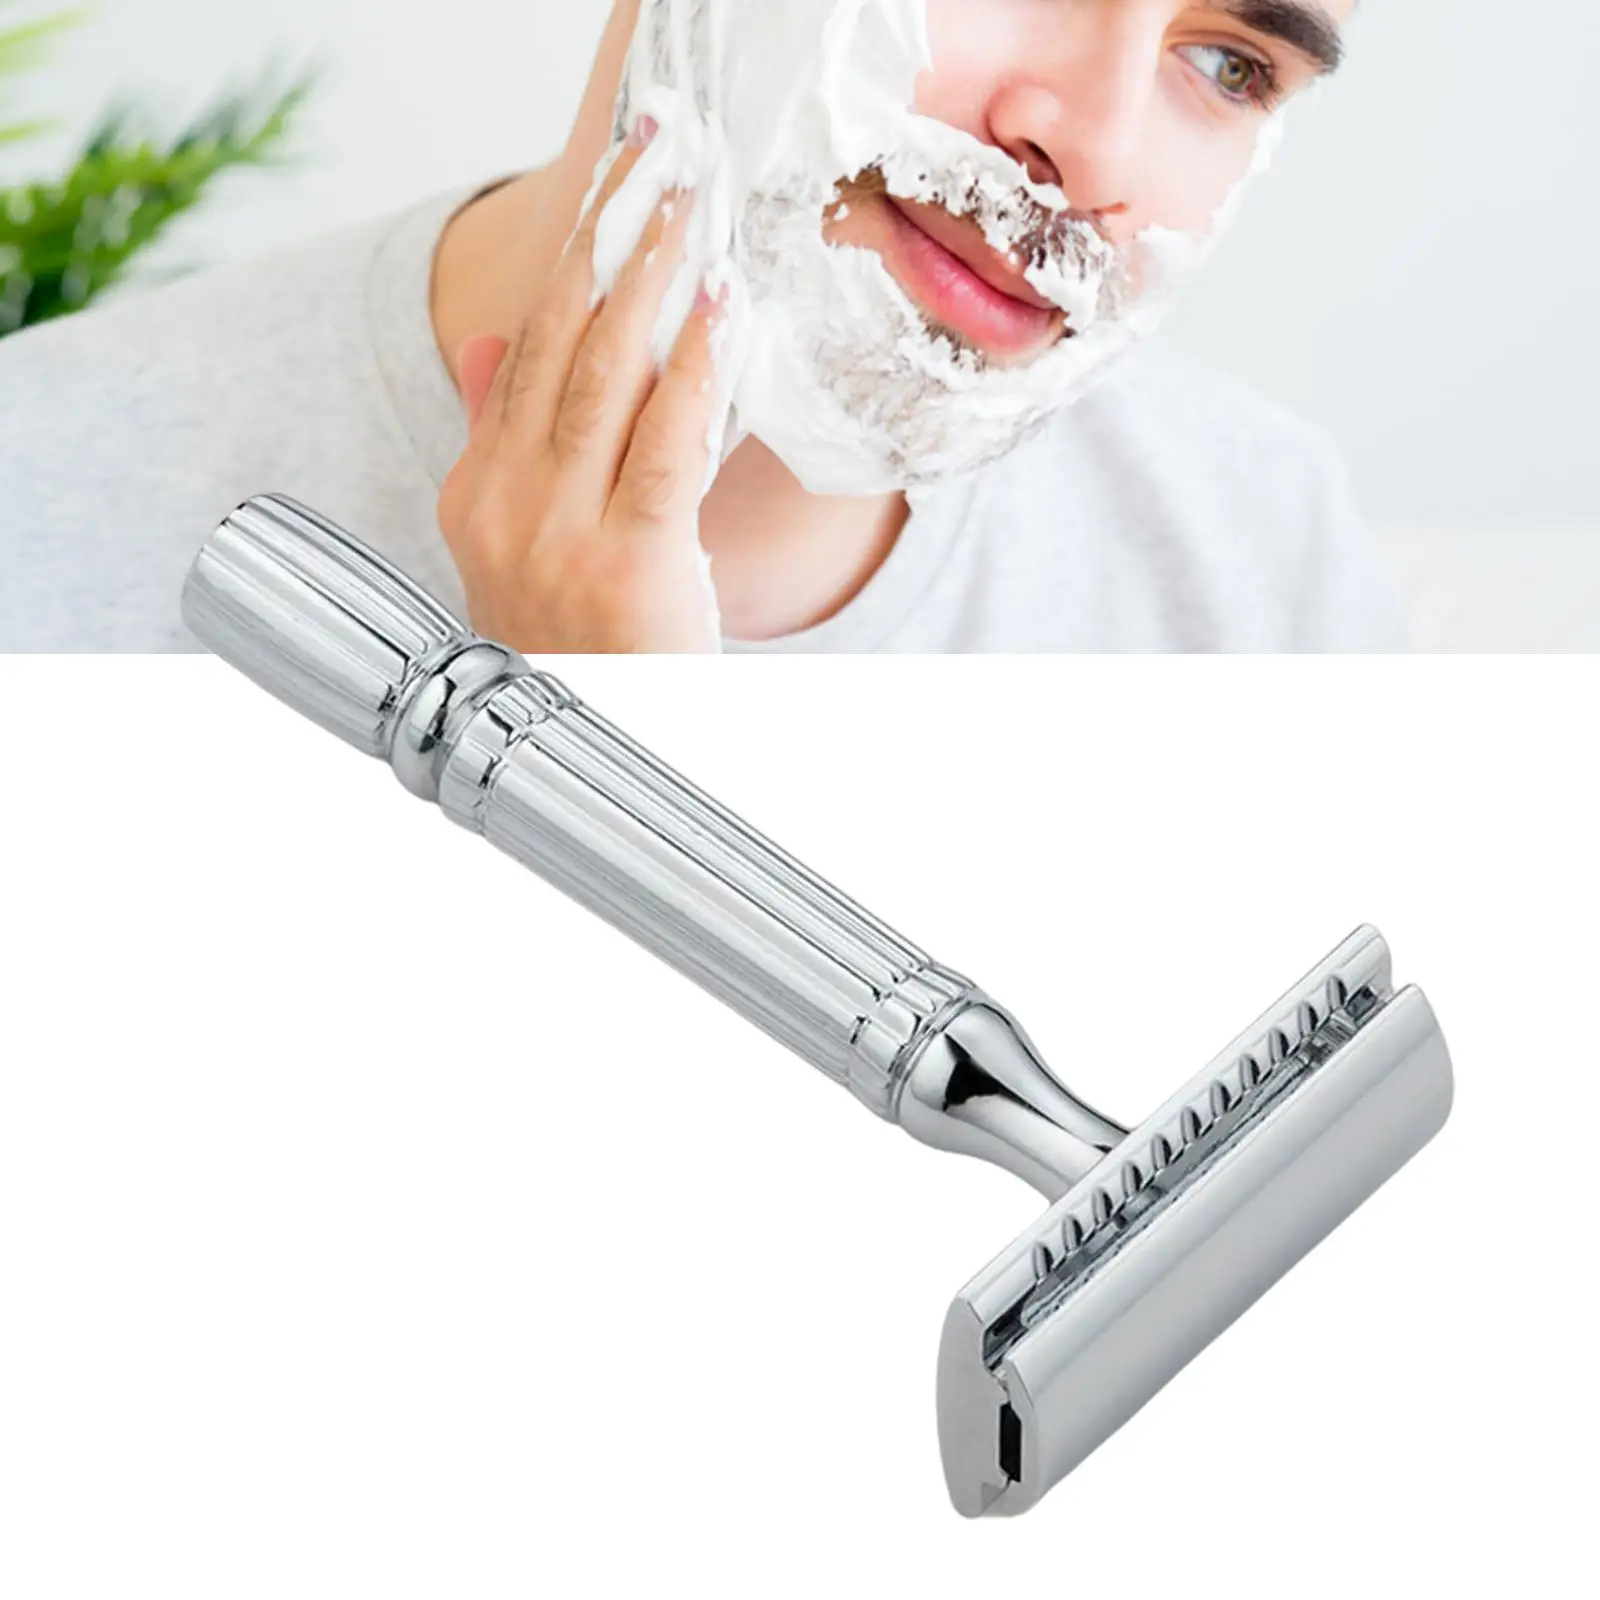 Double Edge Safety , Zinc Alloy Long Handle   for Men, Barber Shop, Home Use, with 5 Premium Stainless Steel 